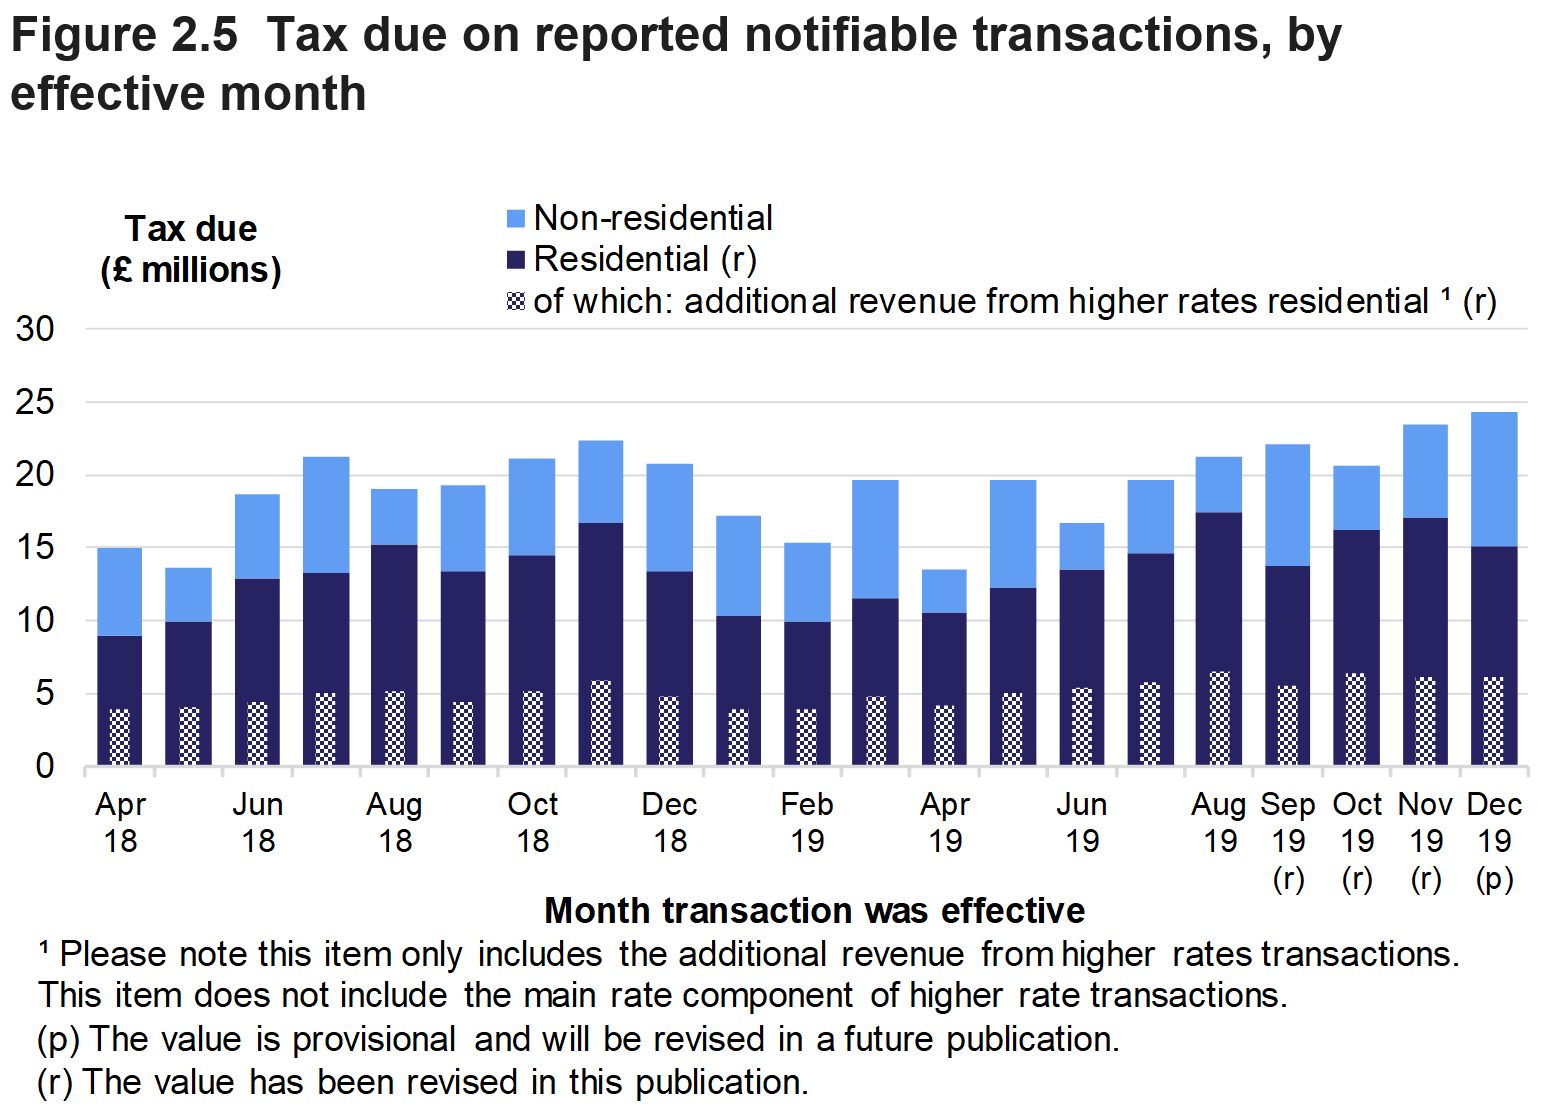 Figure 2.5 shows the monthly amount of tax due on reported notifiable transactions from April 2018 to December 2019, for residential and non-residential transactions.